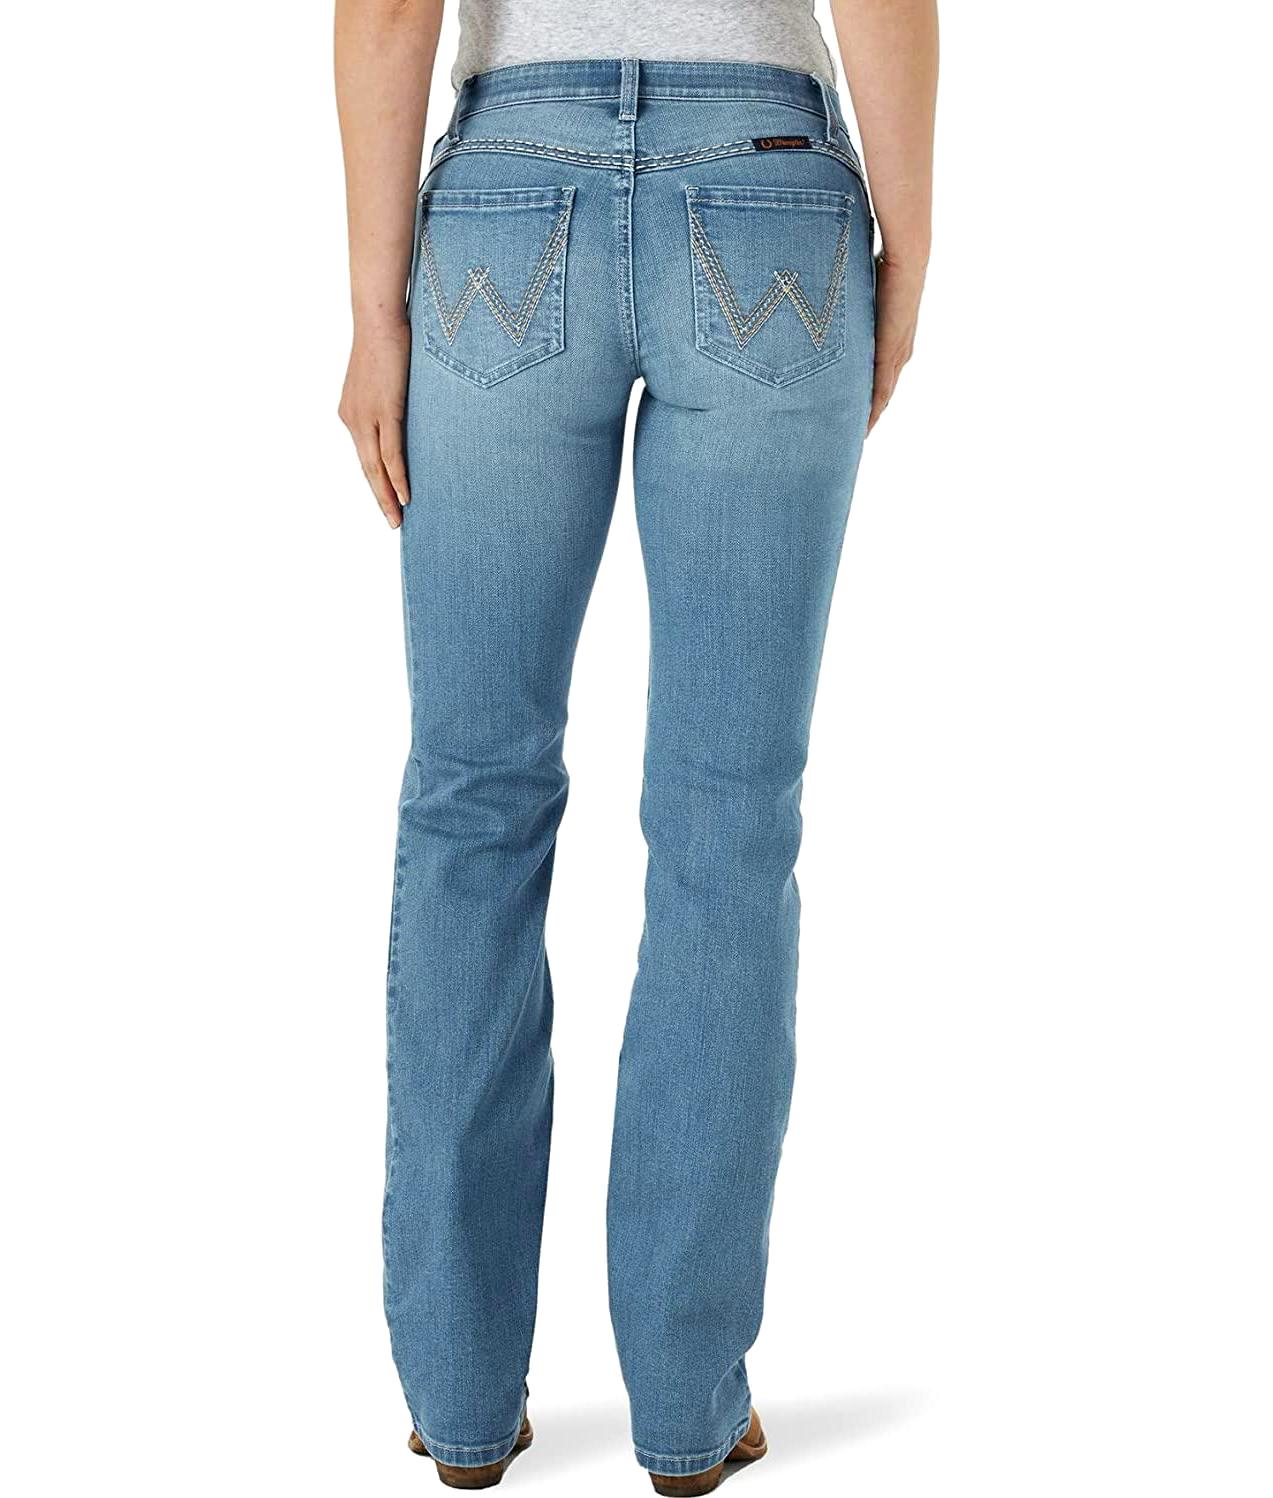 Wrangler Shiloh Low Rise Ultimate Riding Jeans in Hallie